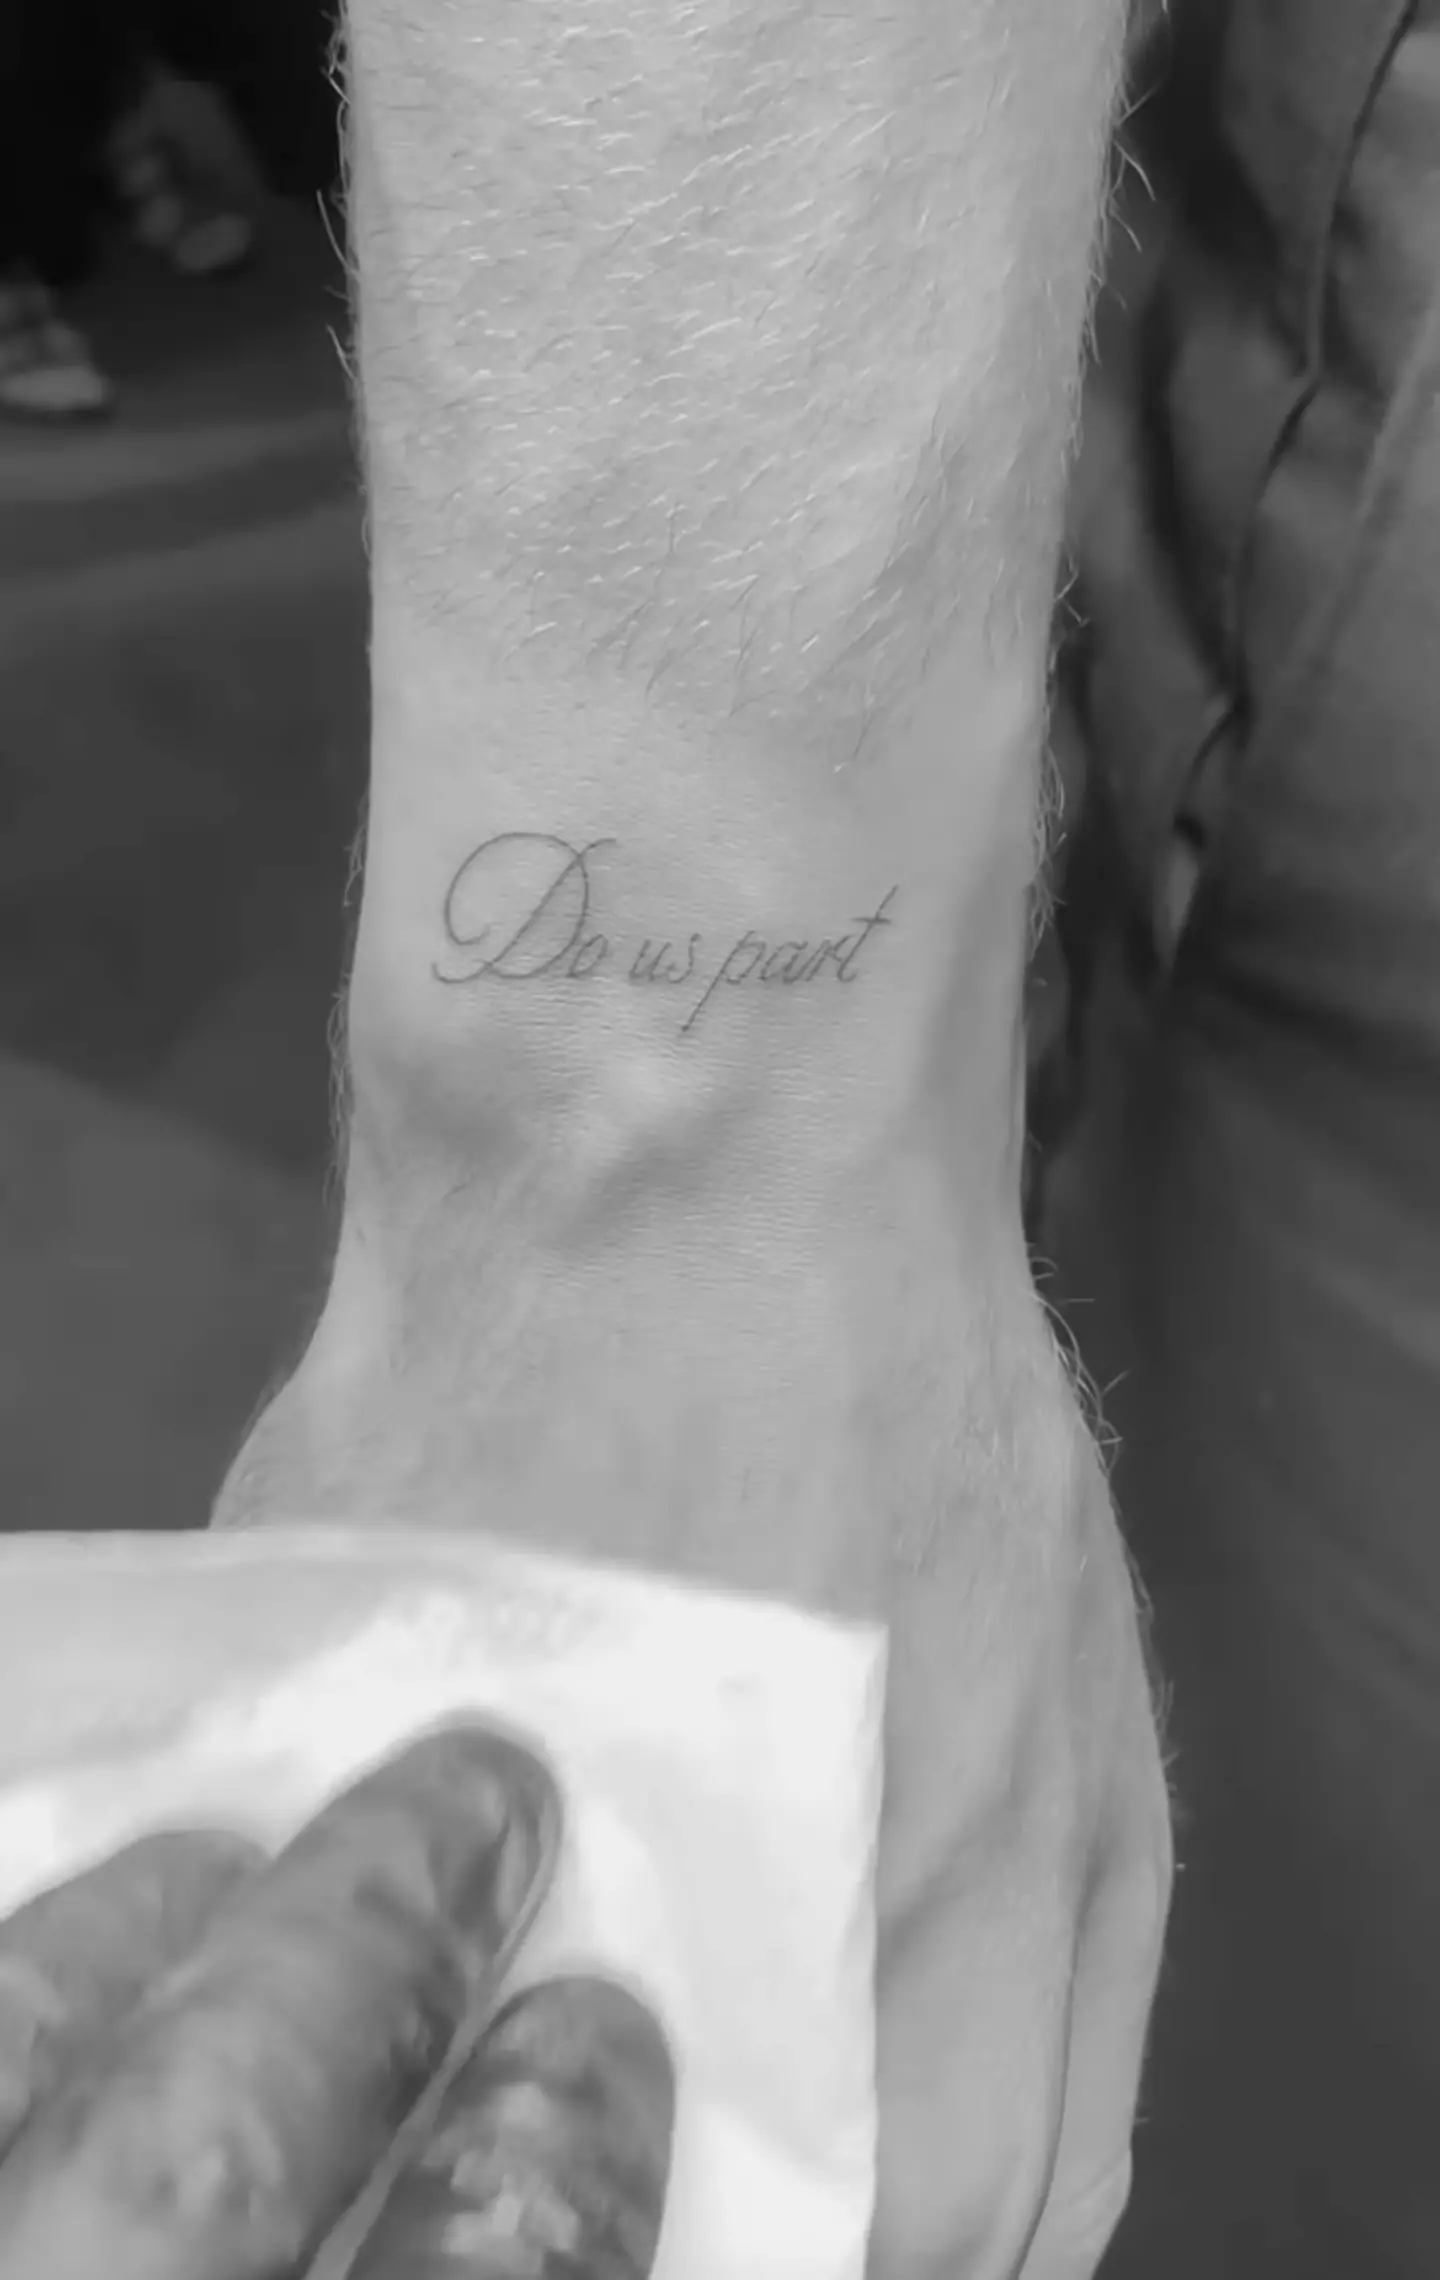 The tattoos read 'Til death' and 'Do us part'.